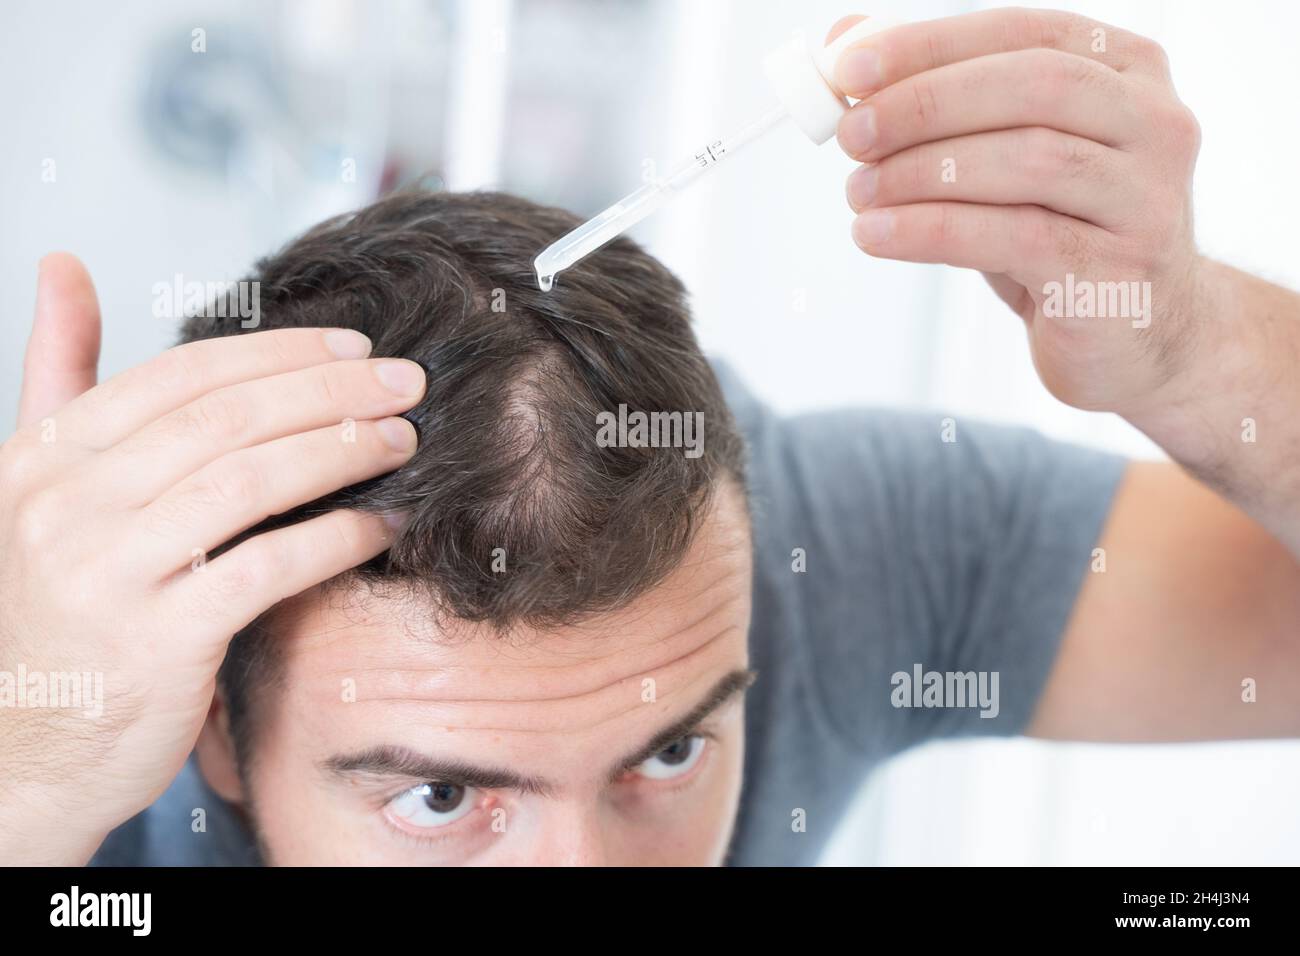 Man doing hair loss treatment as morning routine Stock Photo